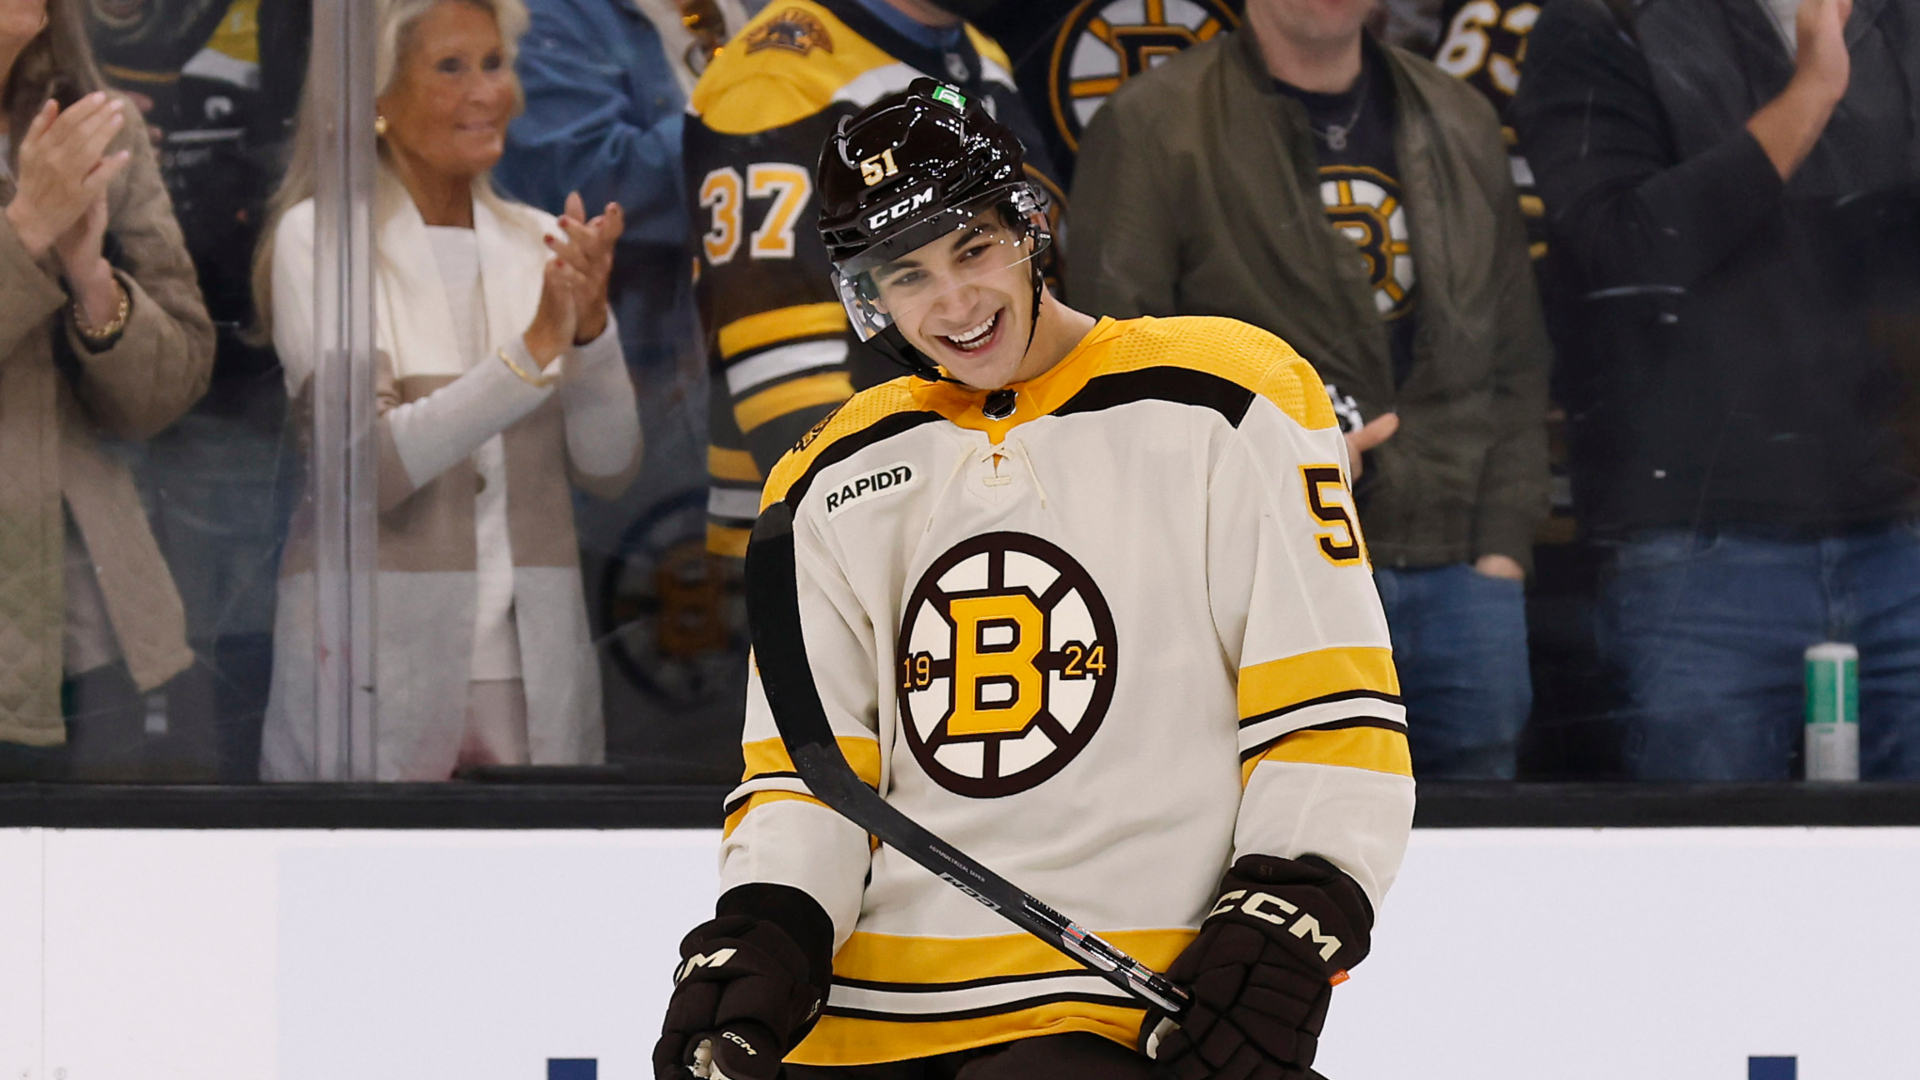 Bruins rookie Poitras plays his way onto roster. Now he needs to find a place to live - rta.com.co